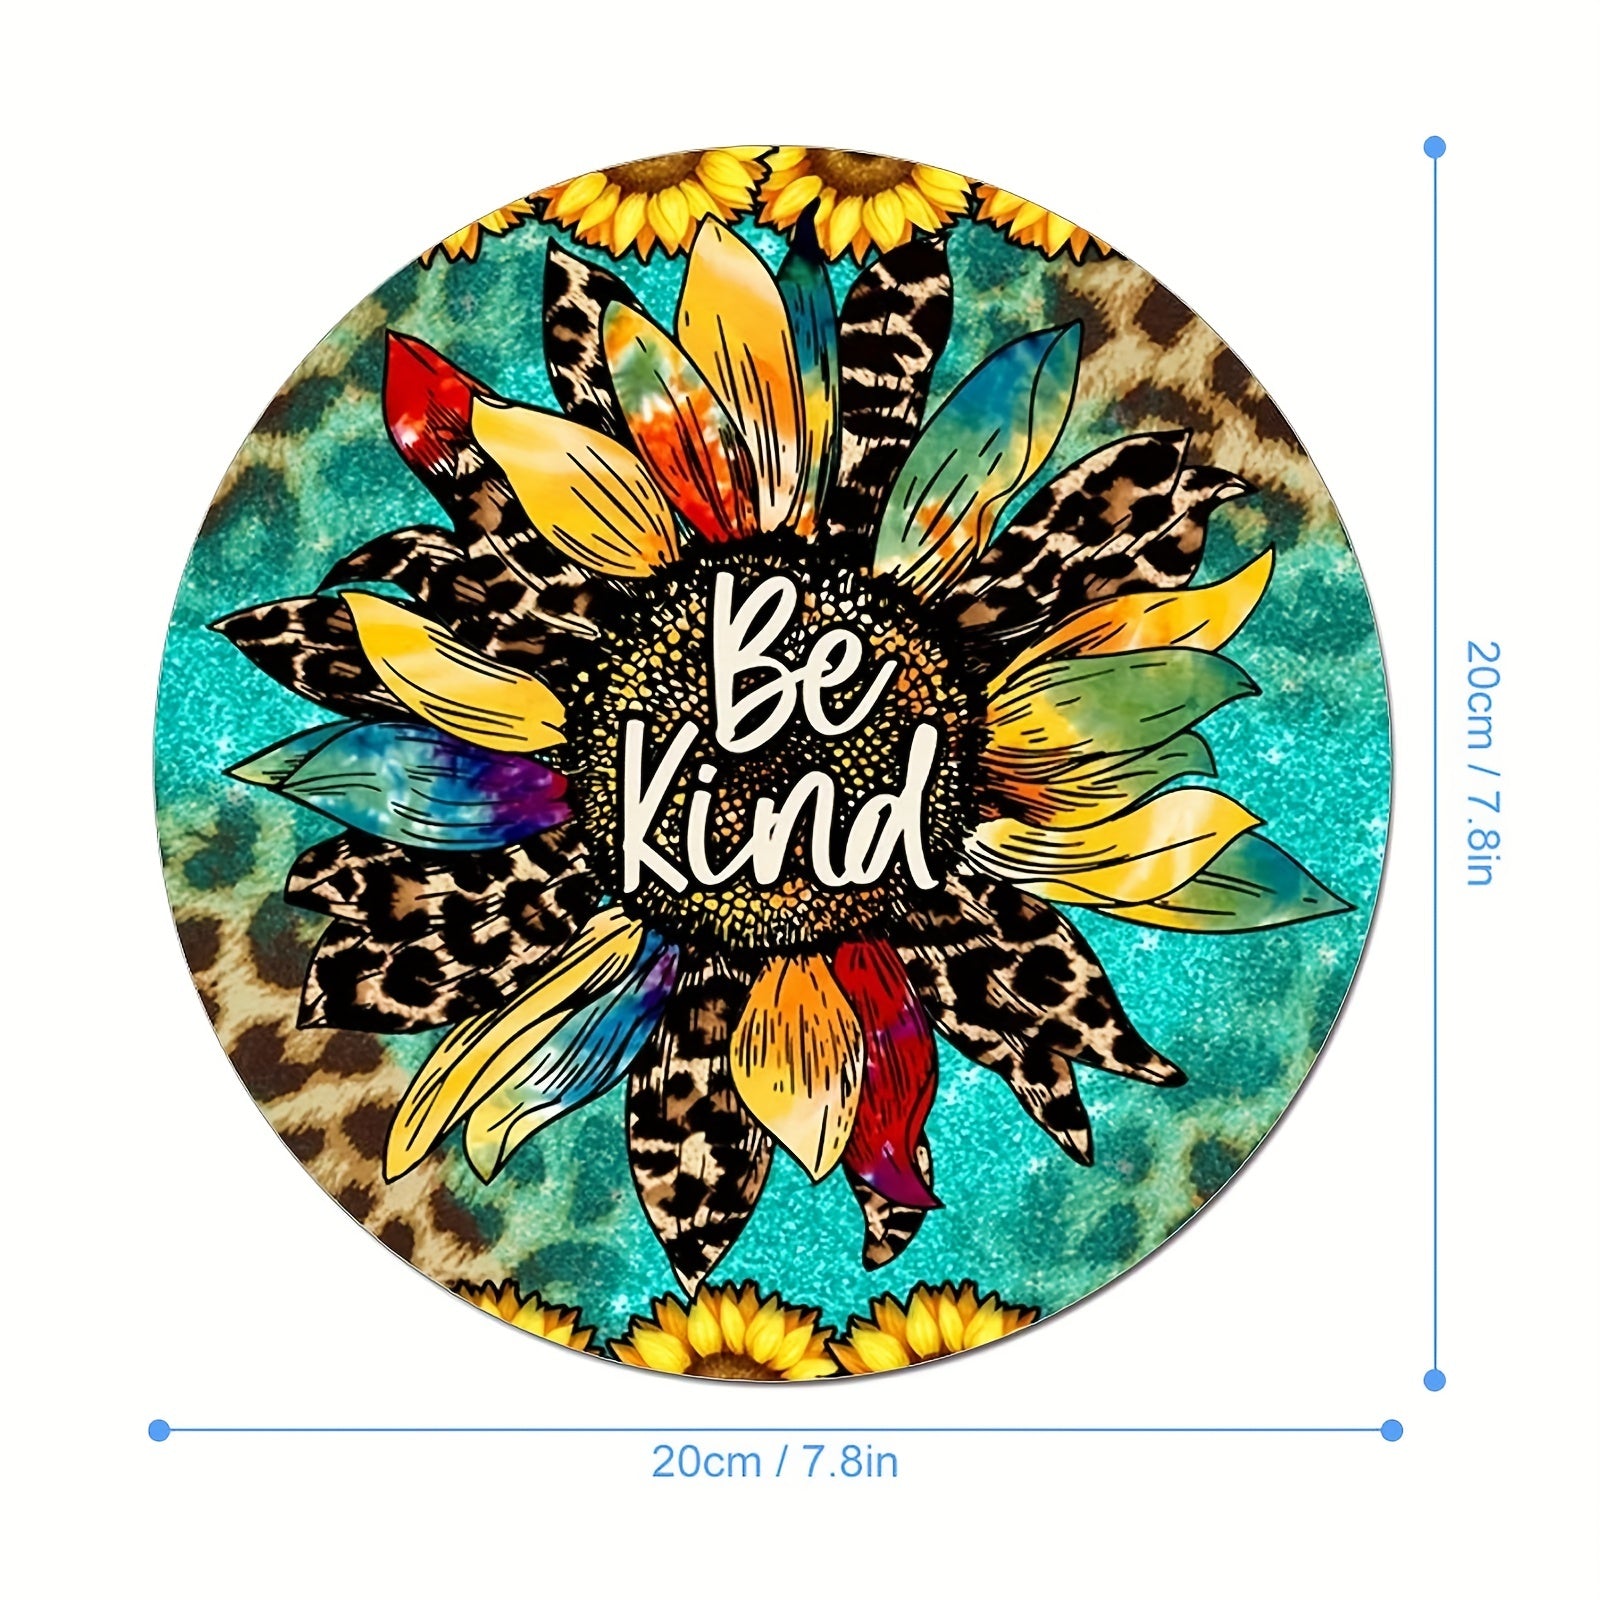 Be Kind Christian Computer Mouse Pad 7.8*7.8*0.12inch/ 19.81*19.81*0.3cm claimedbygoddesigns